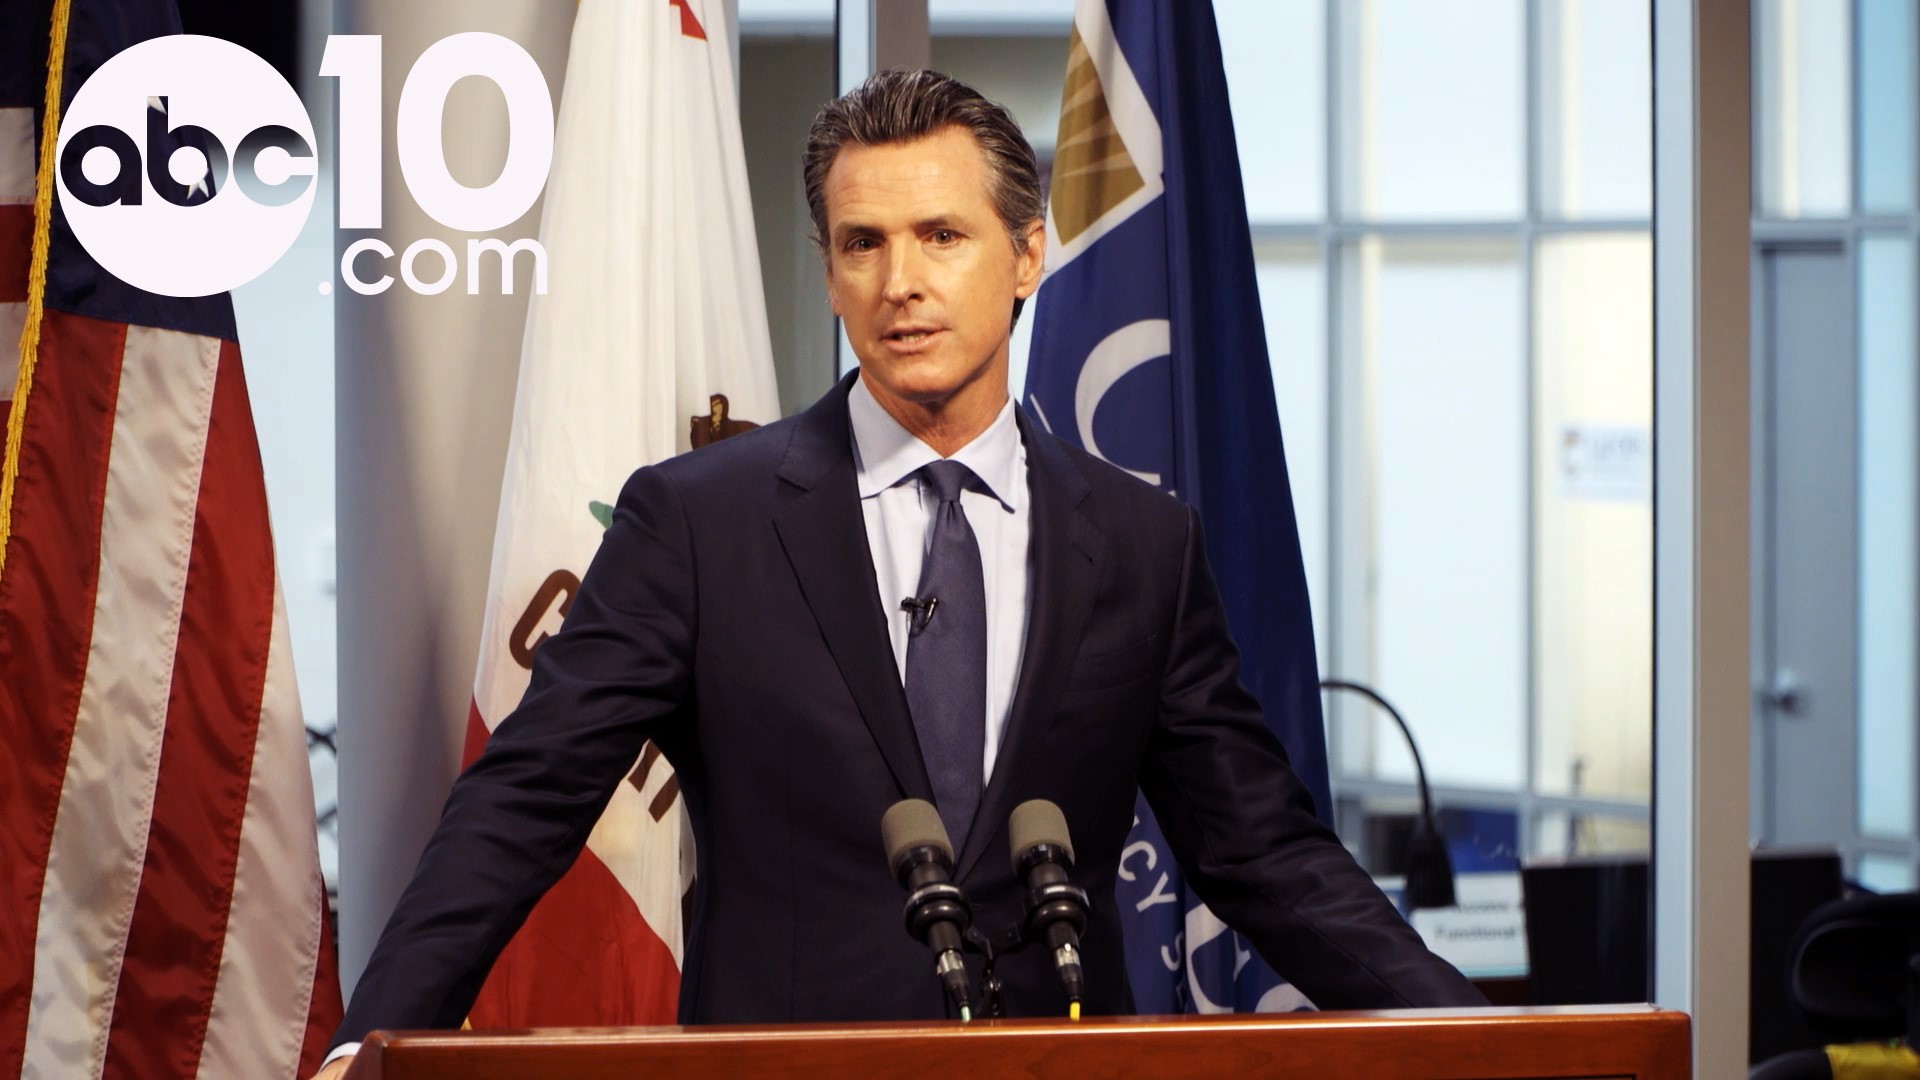 Gov. Gavin Newsom (D-California) says the option of a government takeover of PG&E is "on the table," but declined to specify what would trigger such a move.